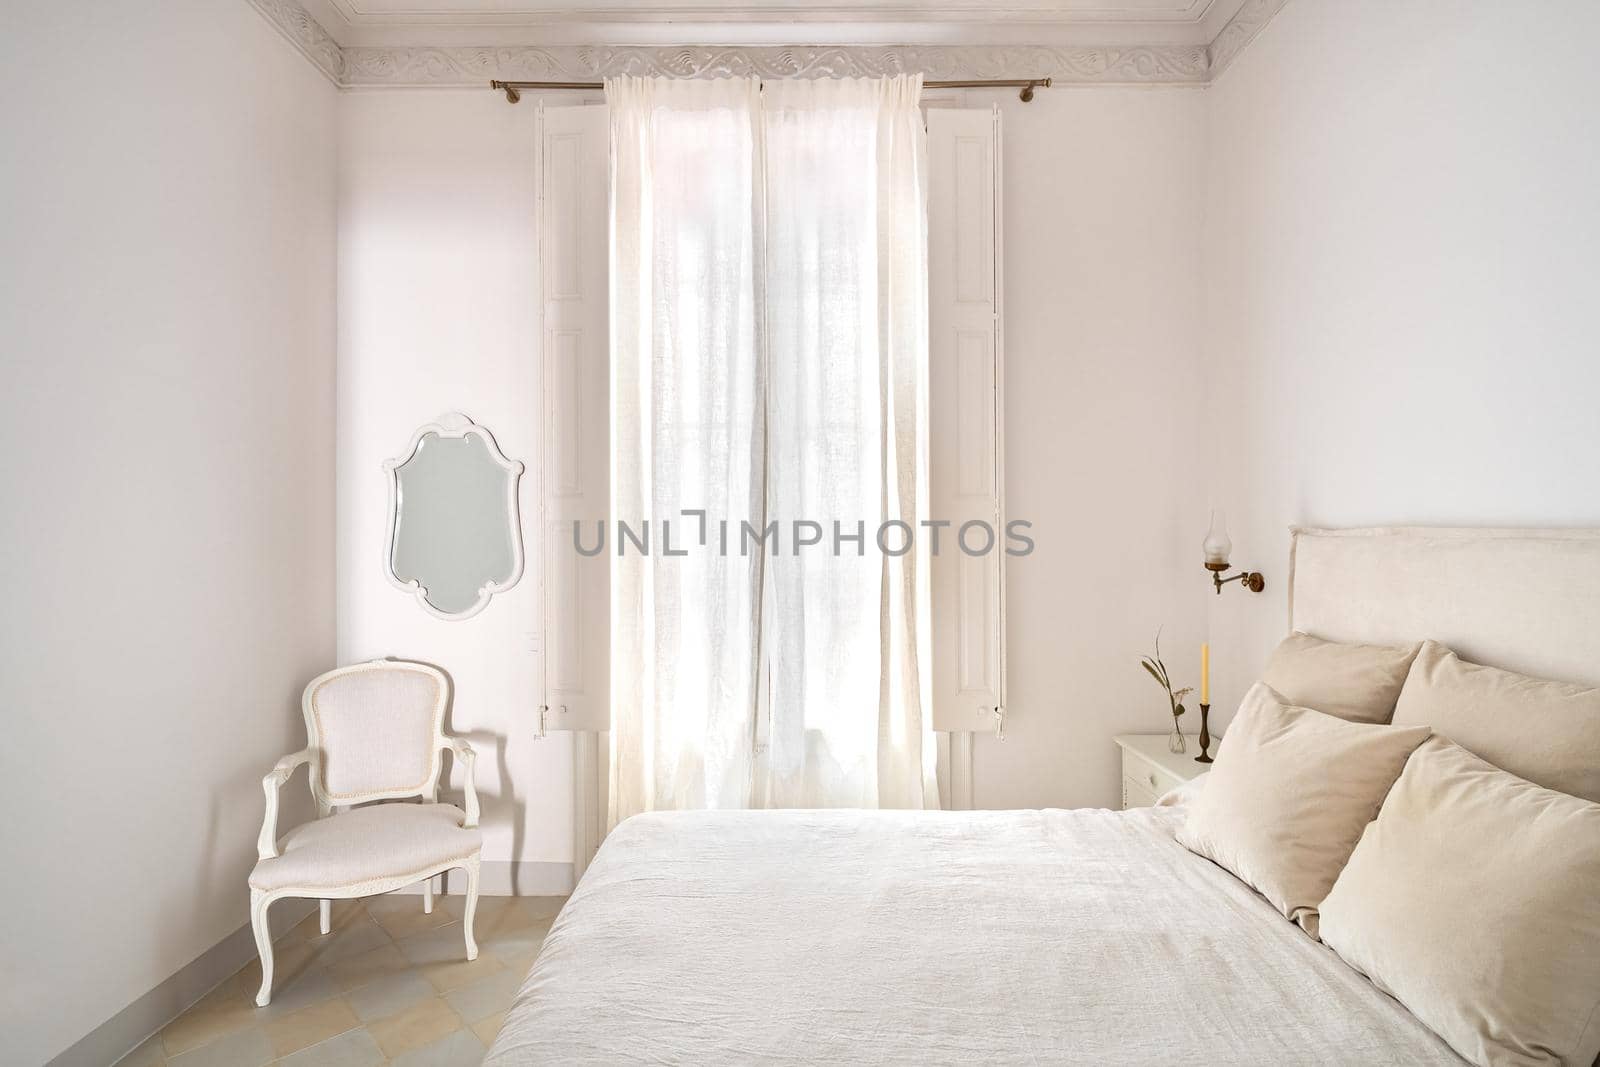 Bright bedroom interior, cozy bed with beige linen, dry flowers on a bedside table. Daylight shines through a window with a curtain